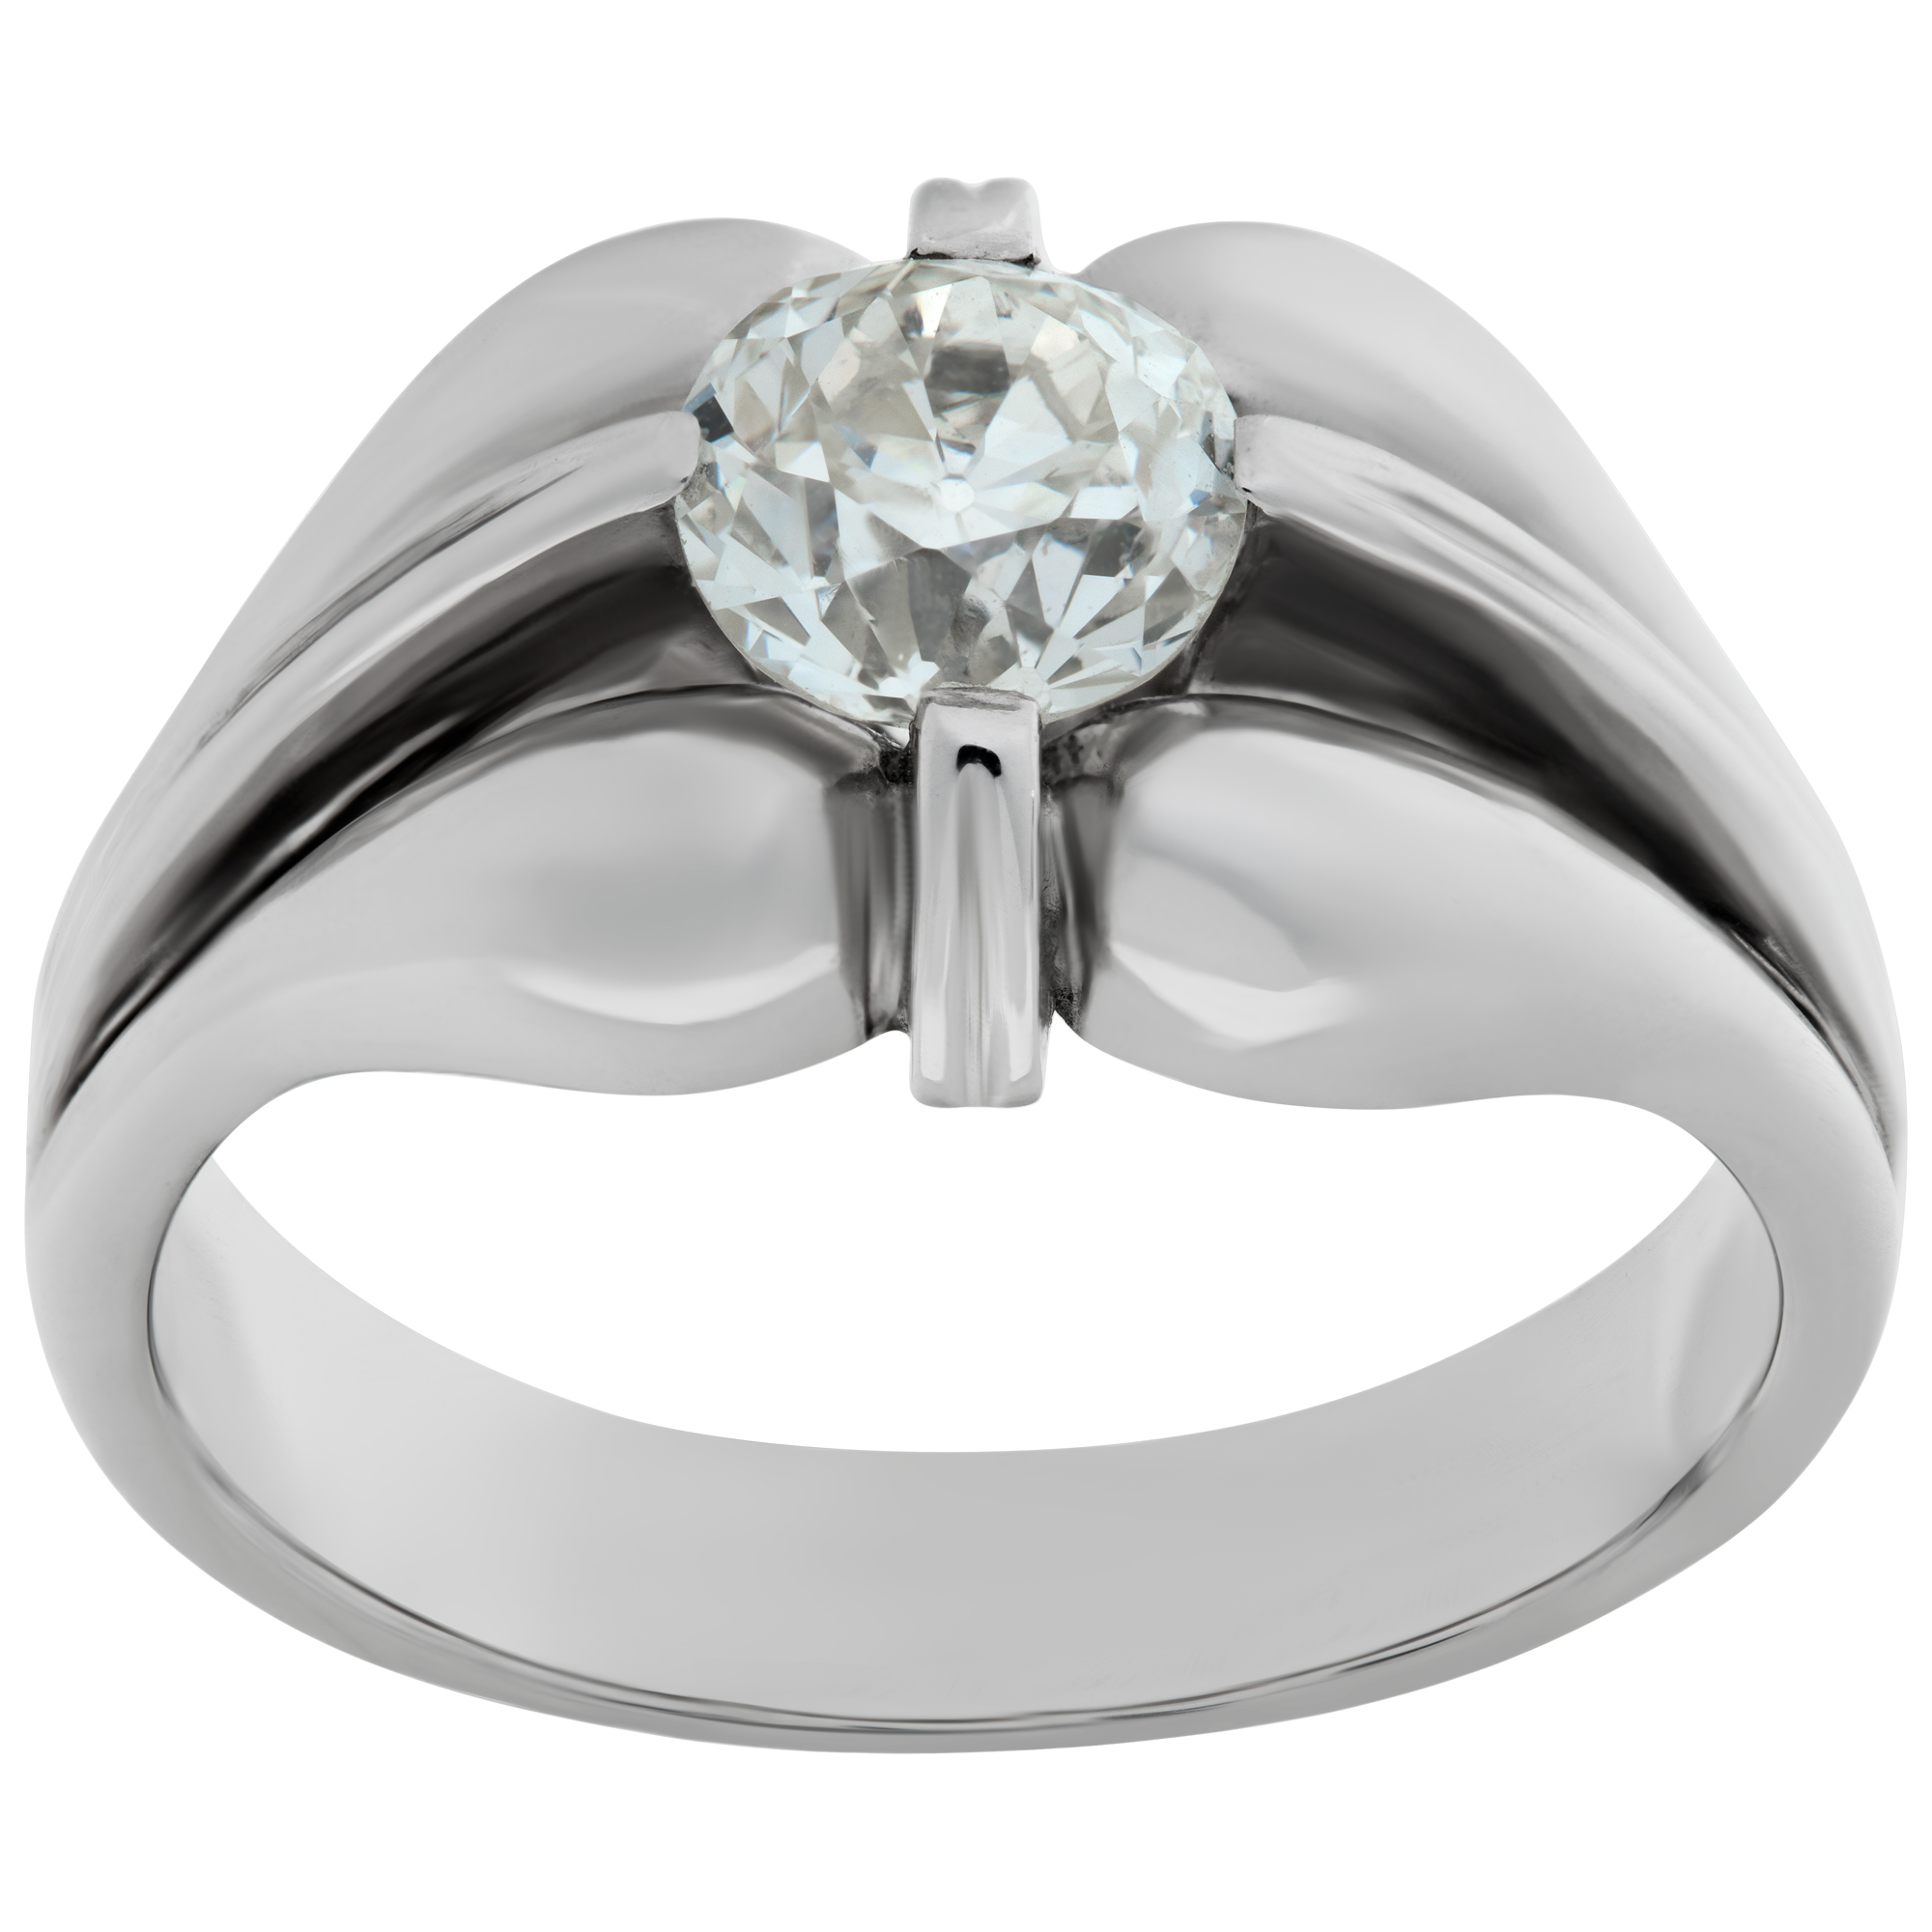 "Gypsy" ring in 14k white gold with app. 1.03 carat diamond